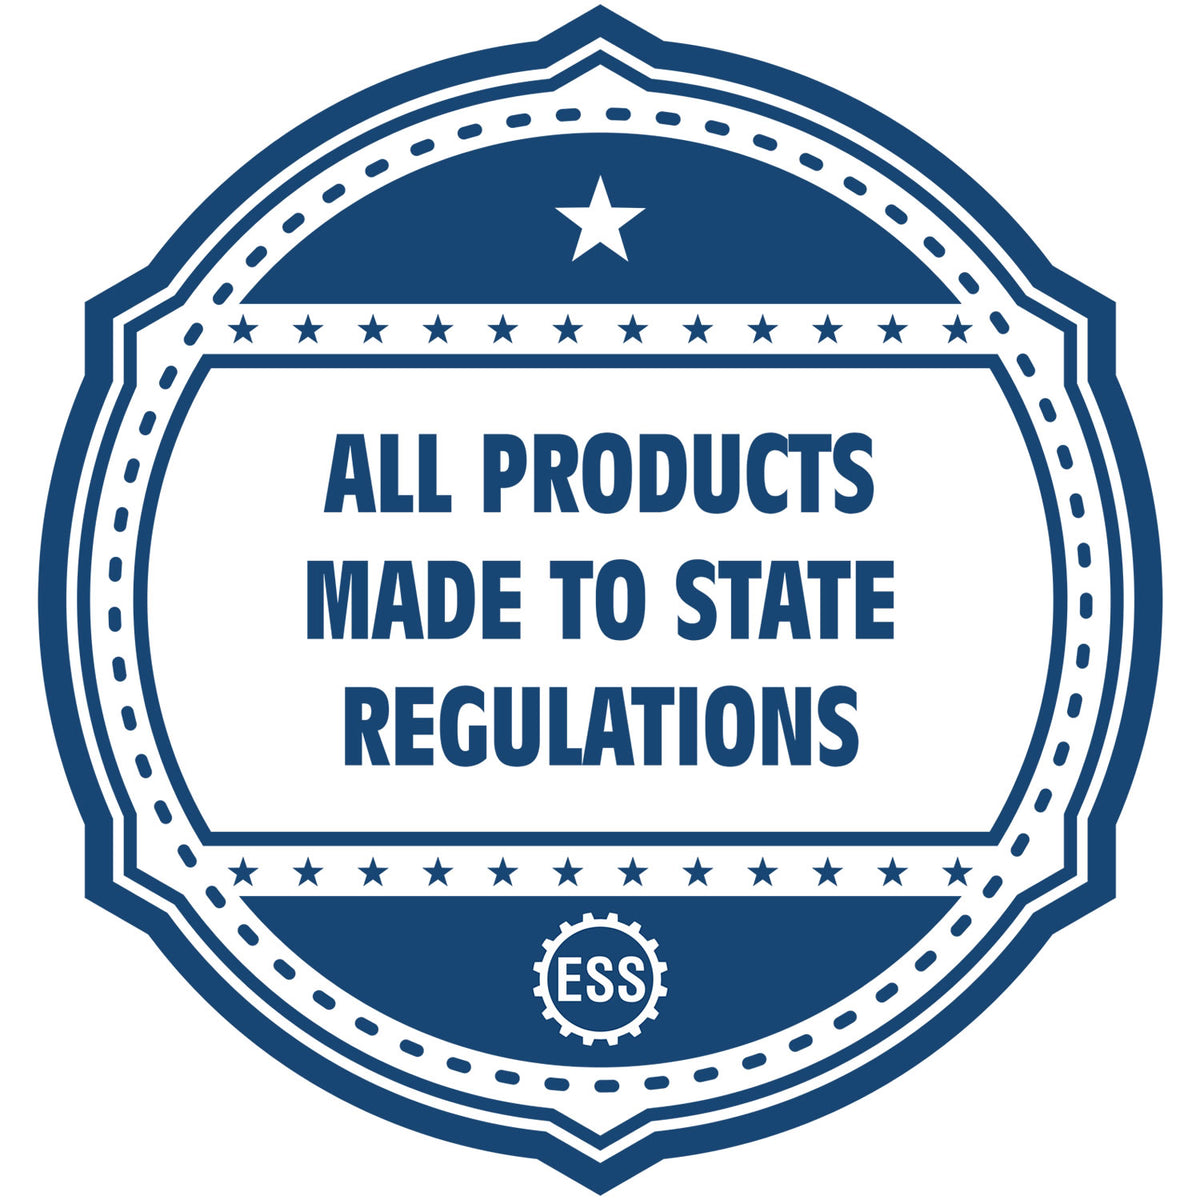 An icon or badge element for the Digital Oklahoma Landscape Architect Stamp showing that this product is made in compliance with state regulations.